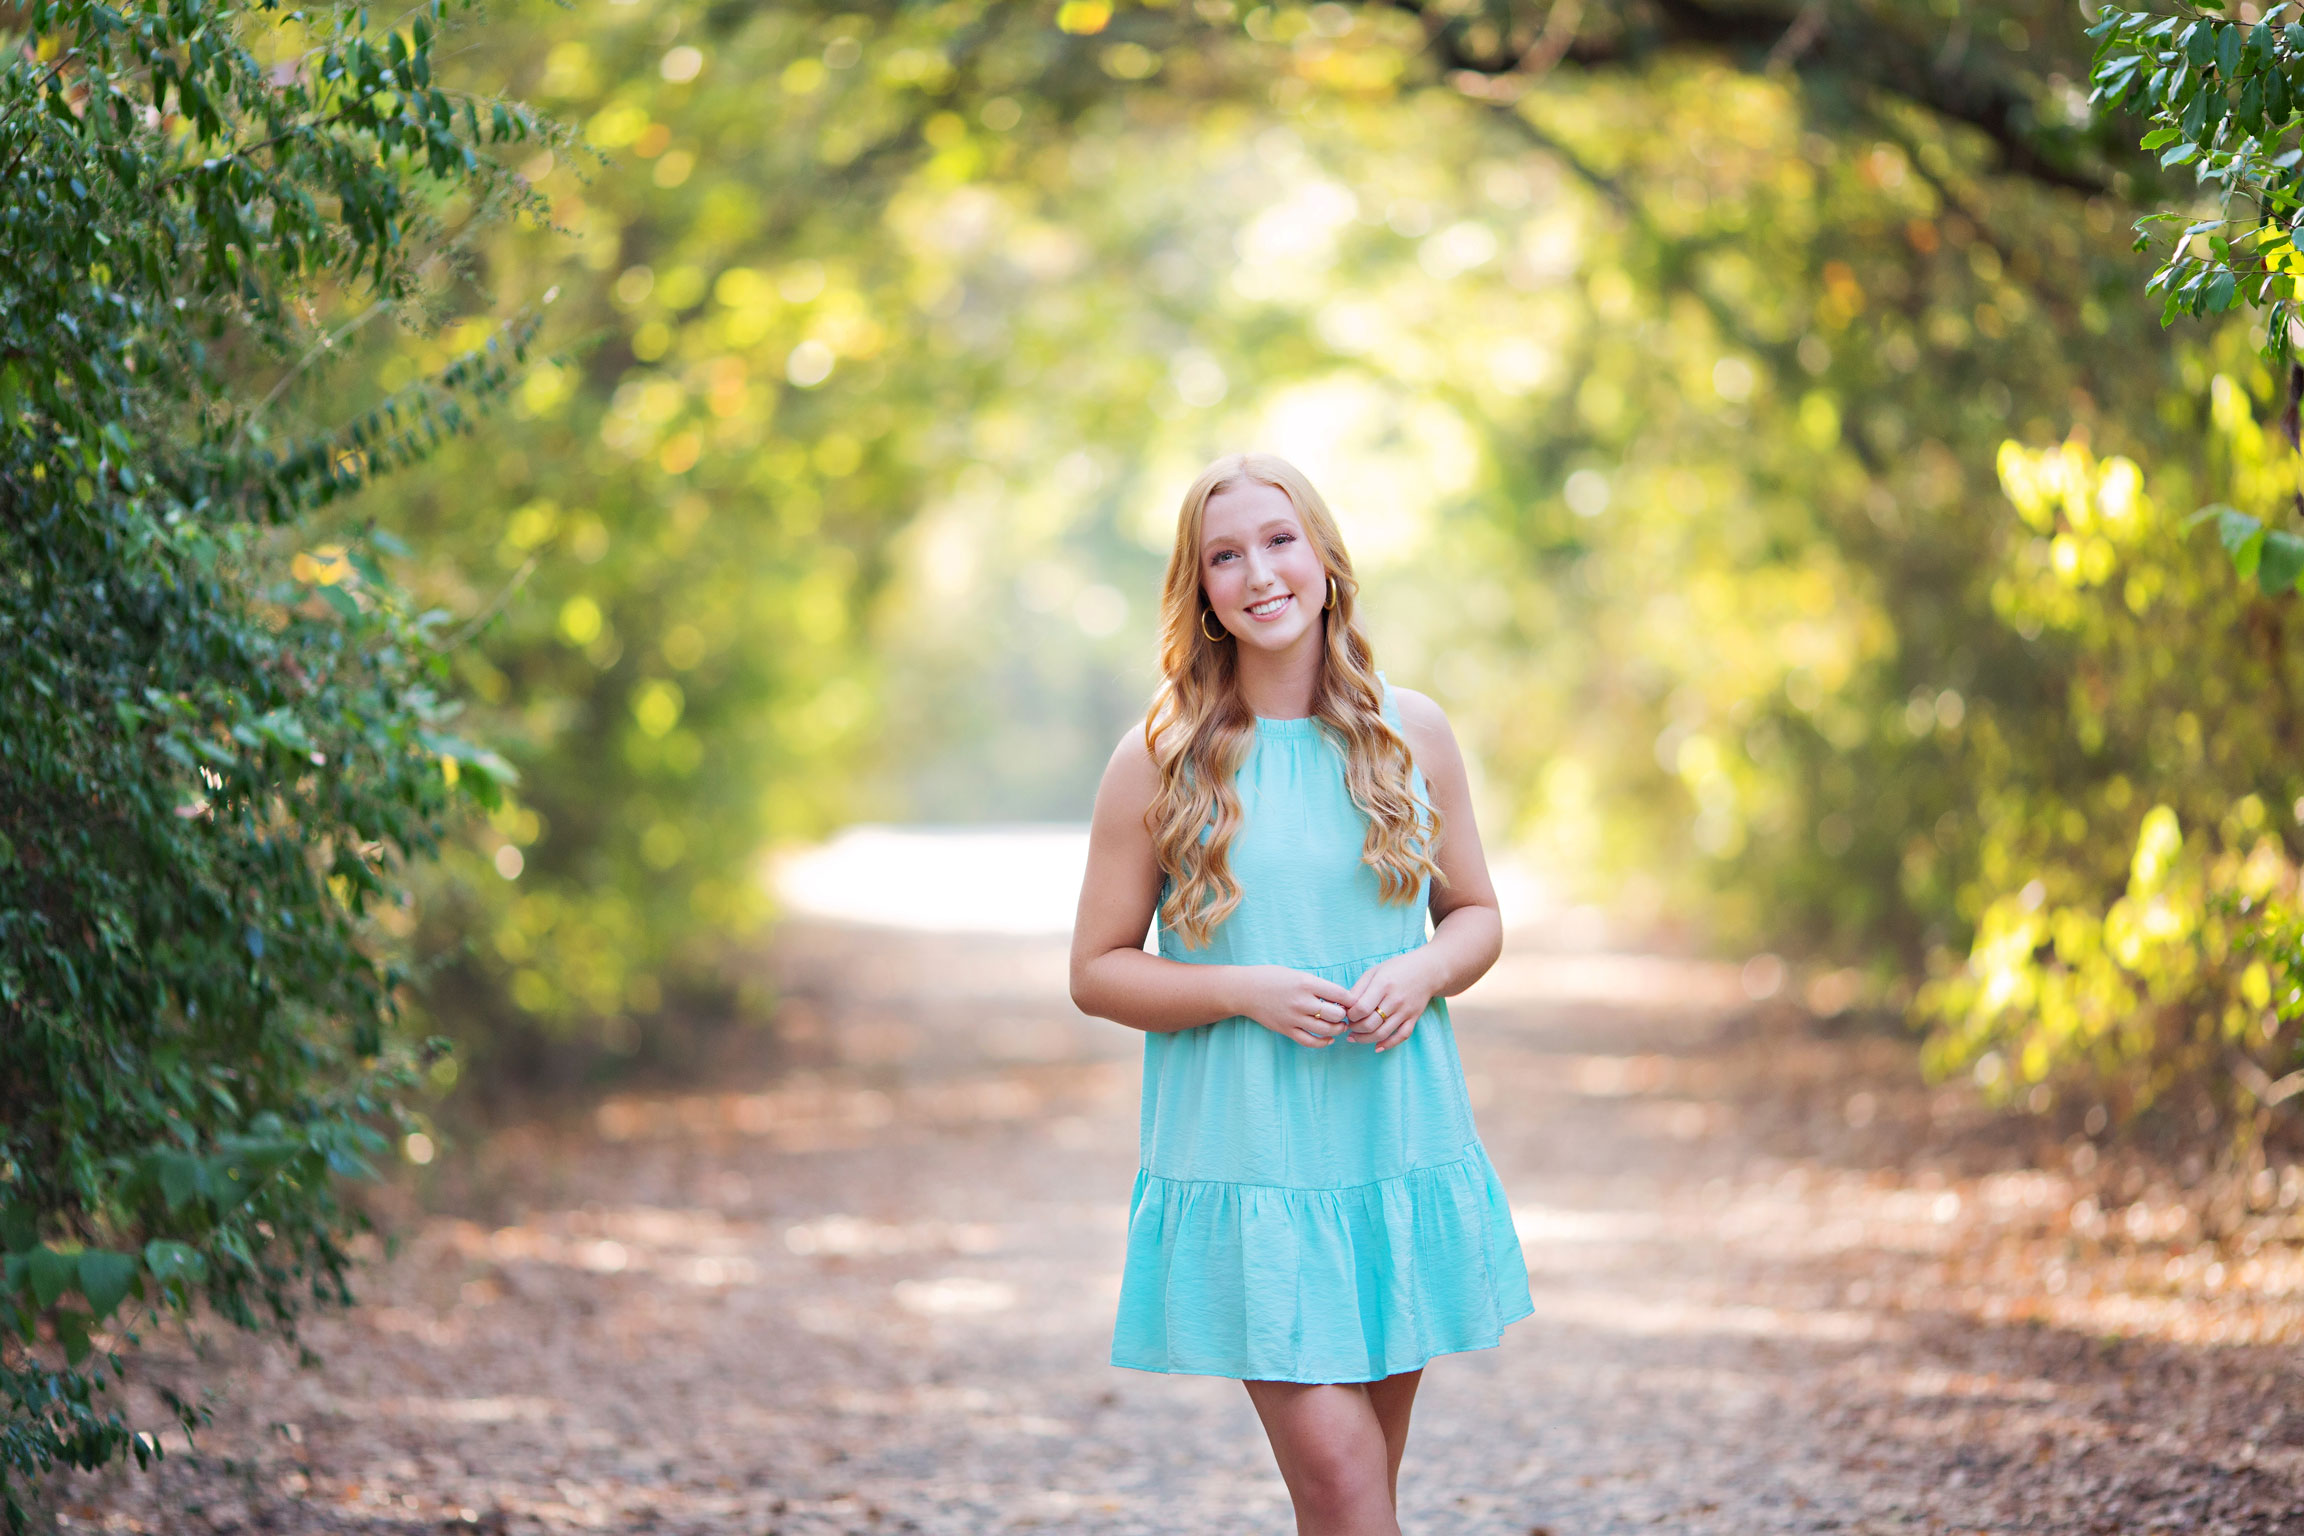 Girl posing wearing blue dress out in nature for senior portraits